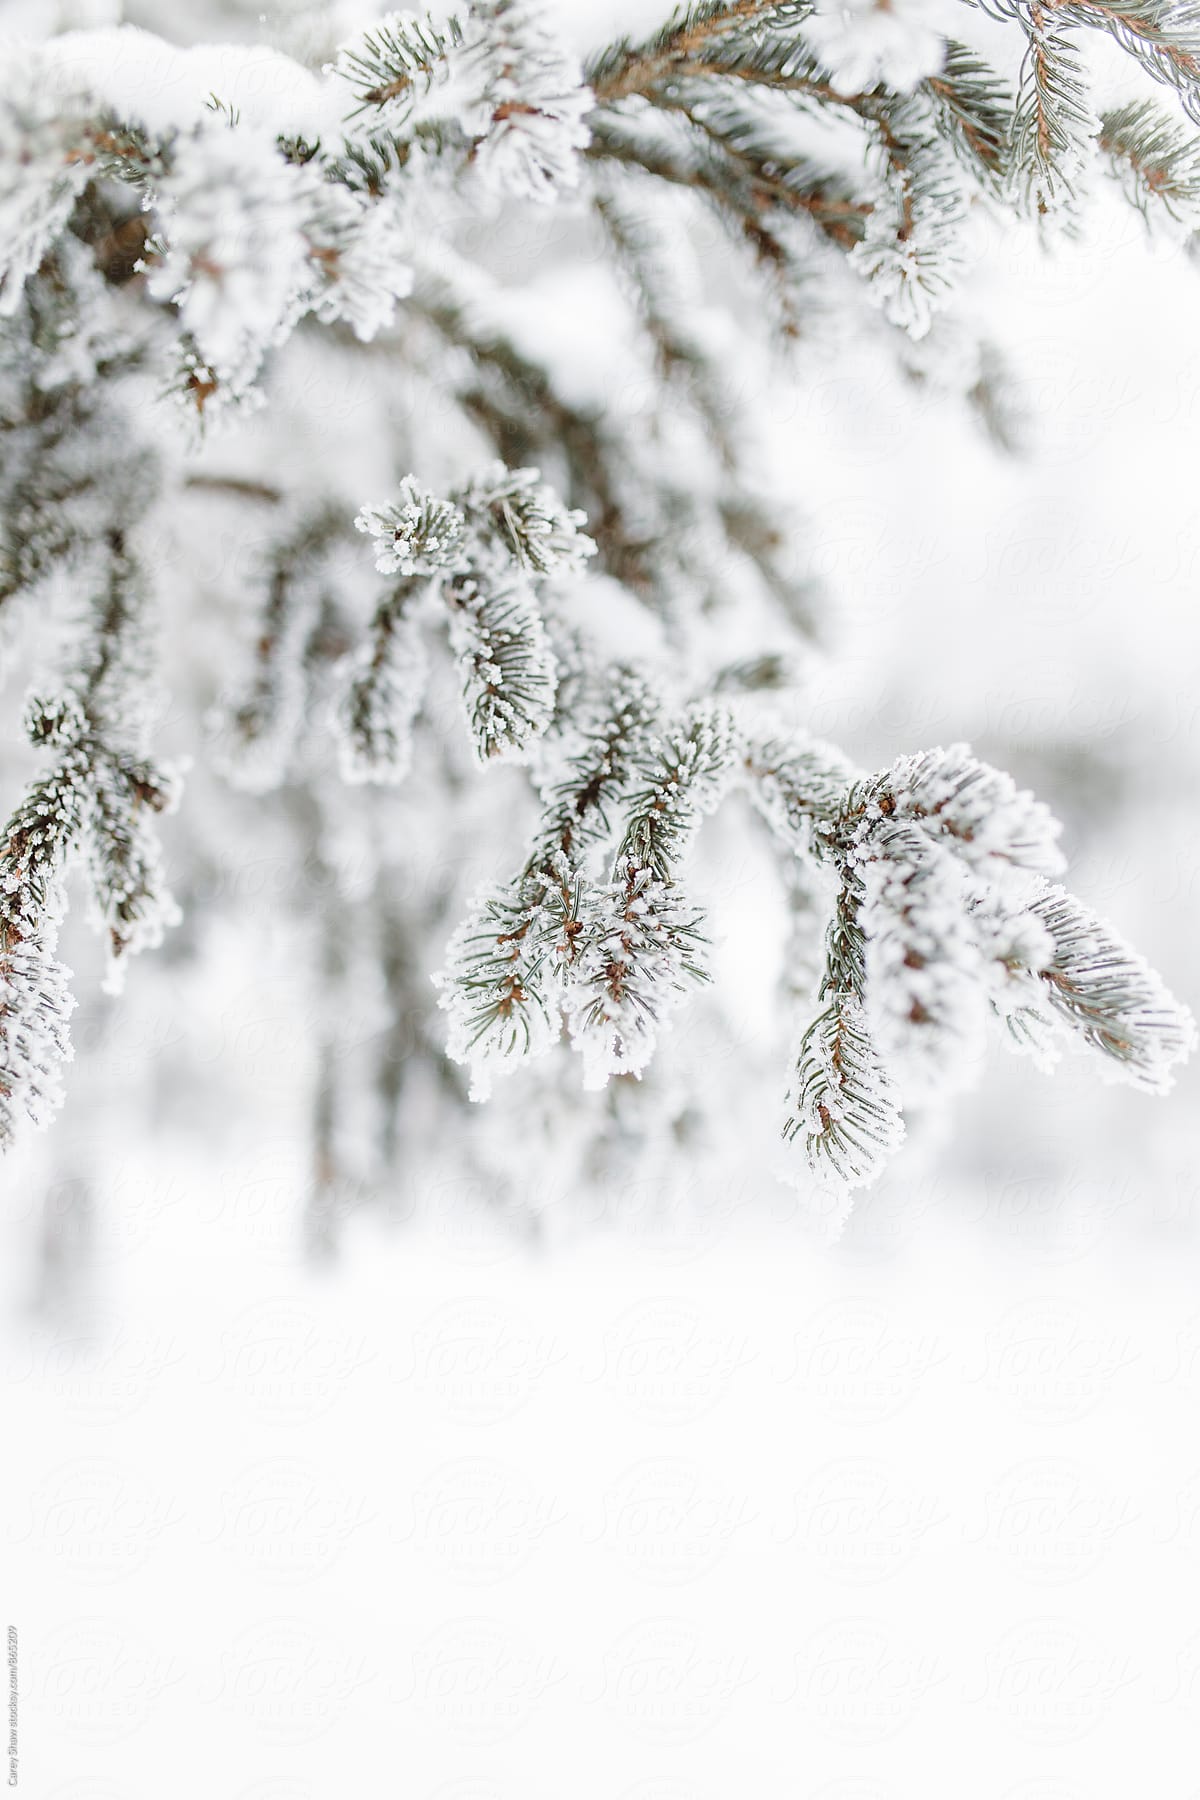 Detail of frost covered evergreen tree in winter